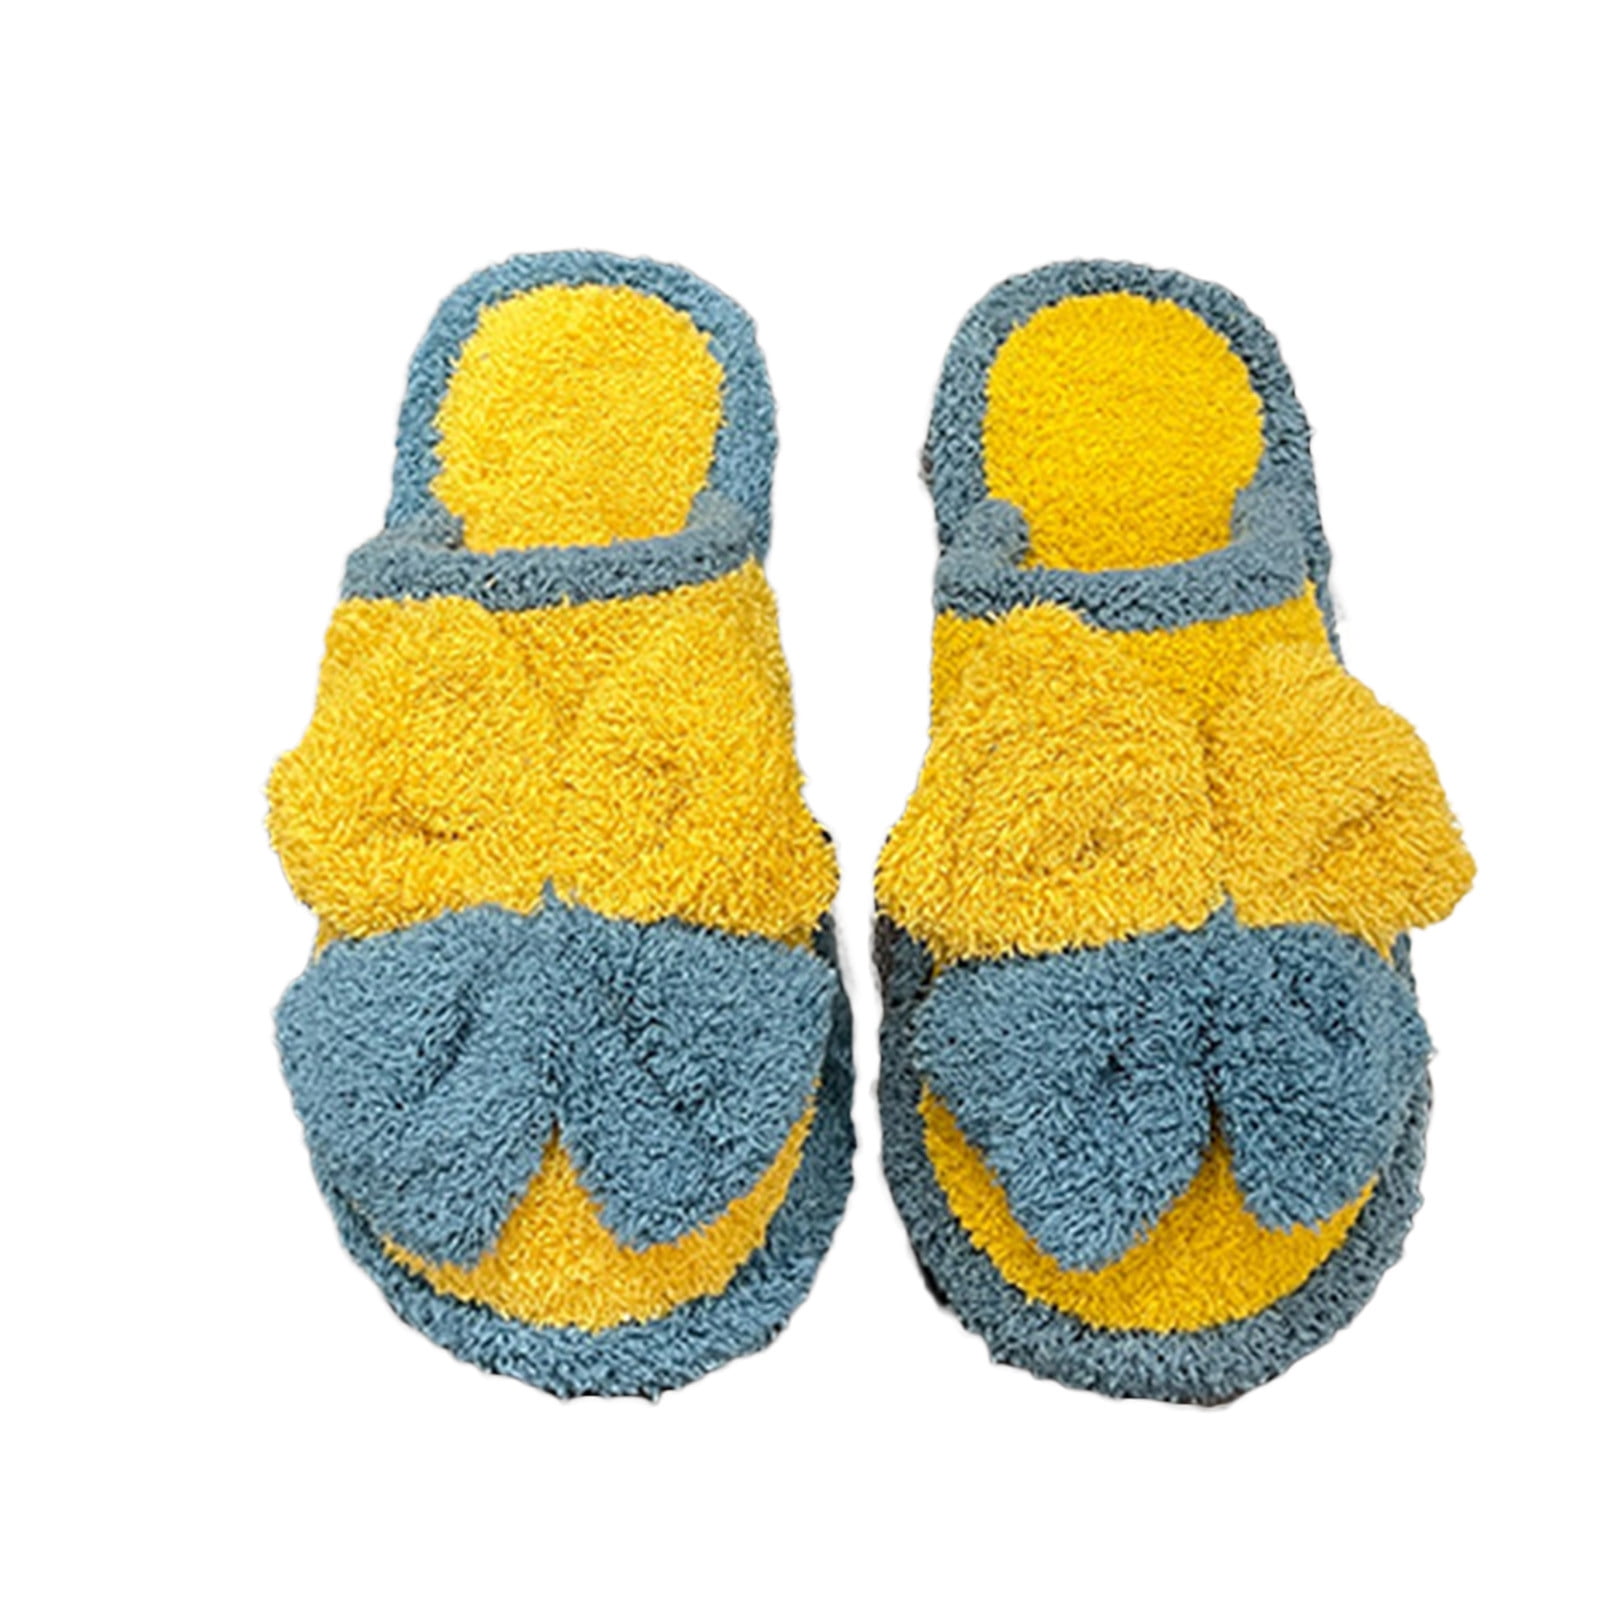 LoyisViDion Womens Slippers Clearance Home Cotton Slippers Big Bowknot ...